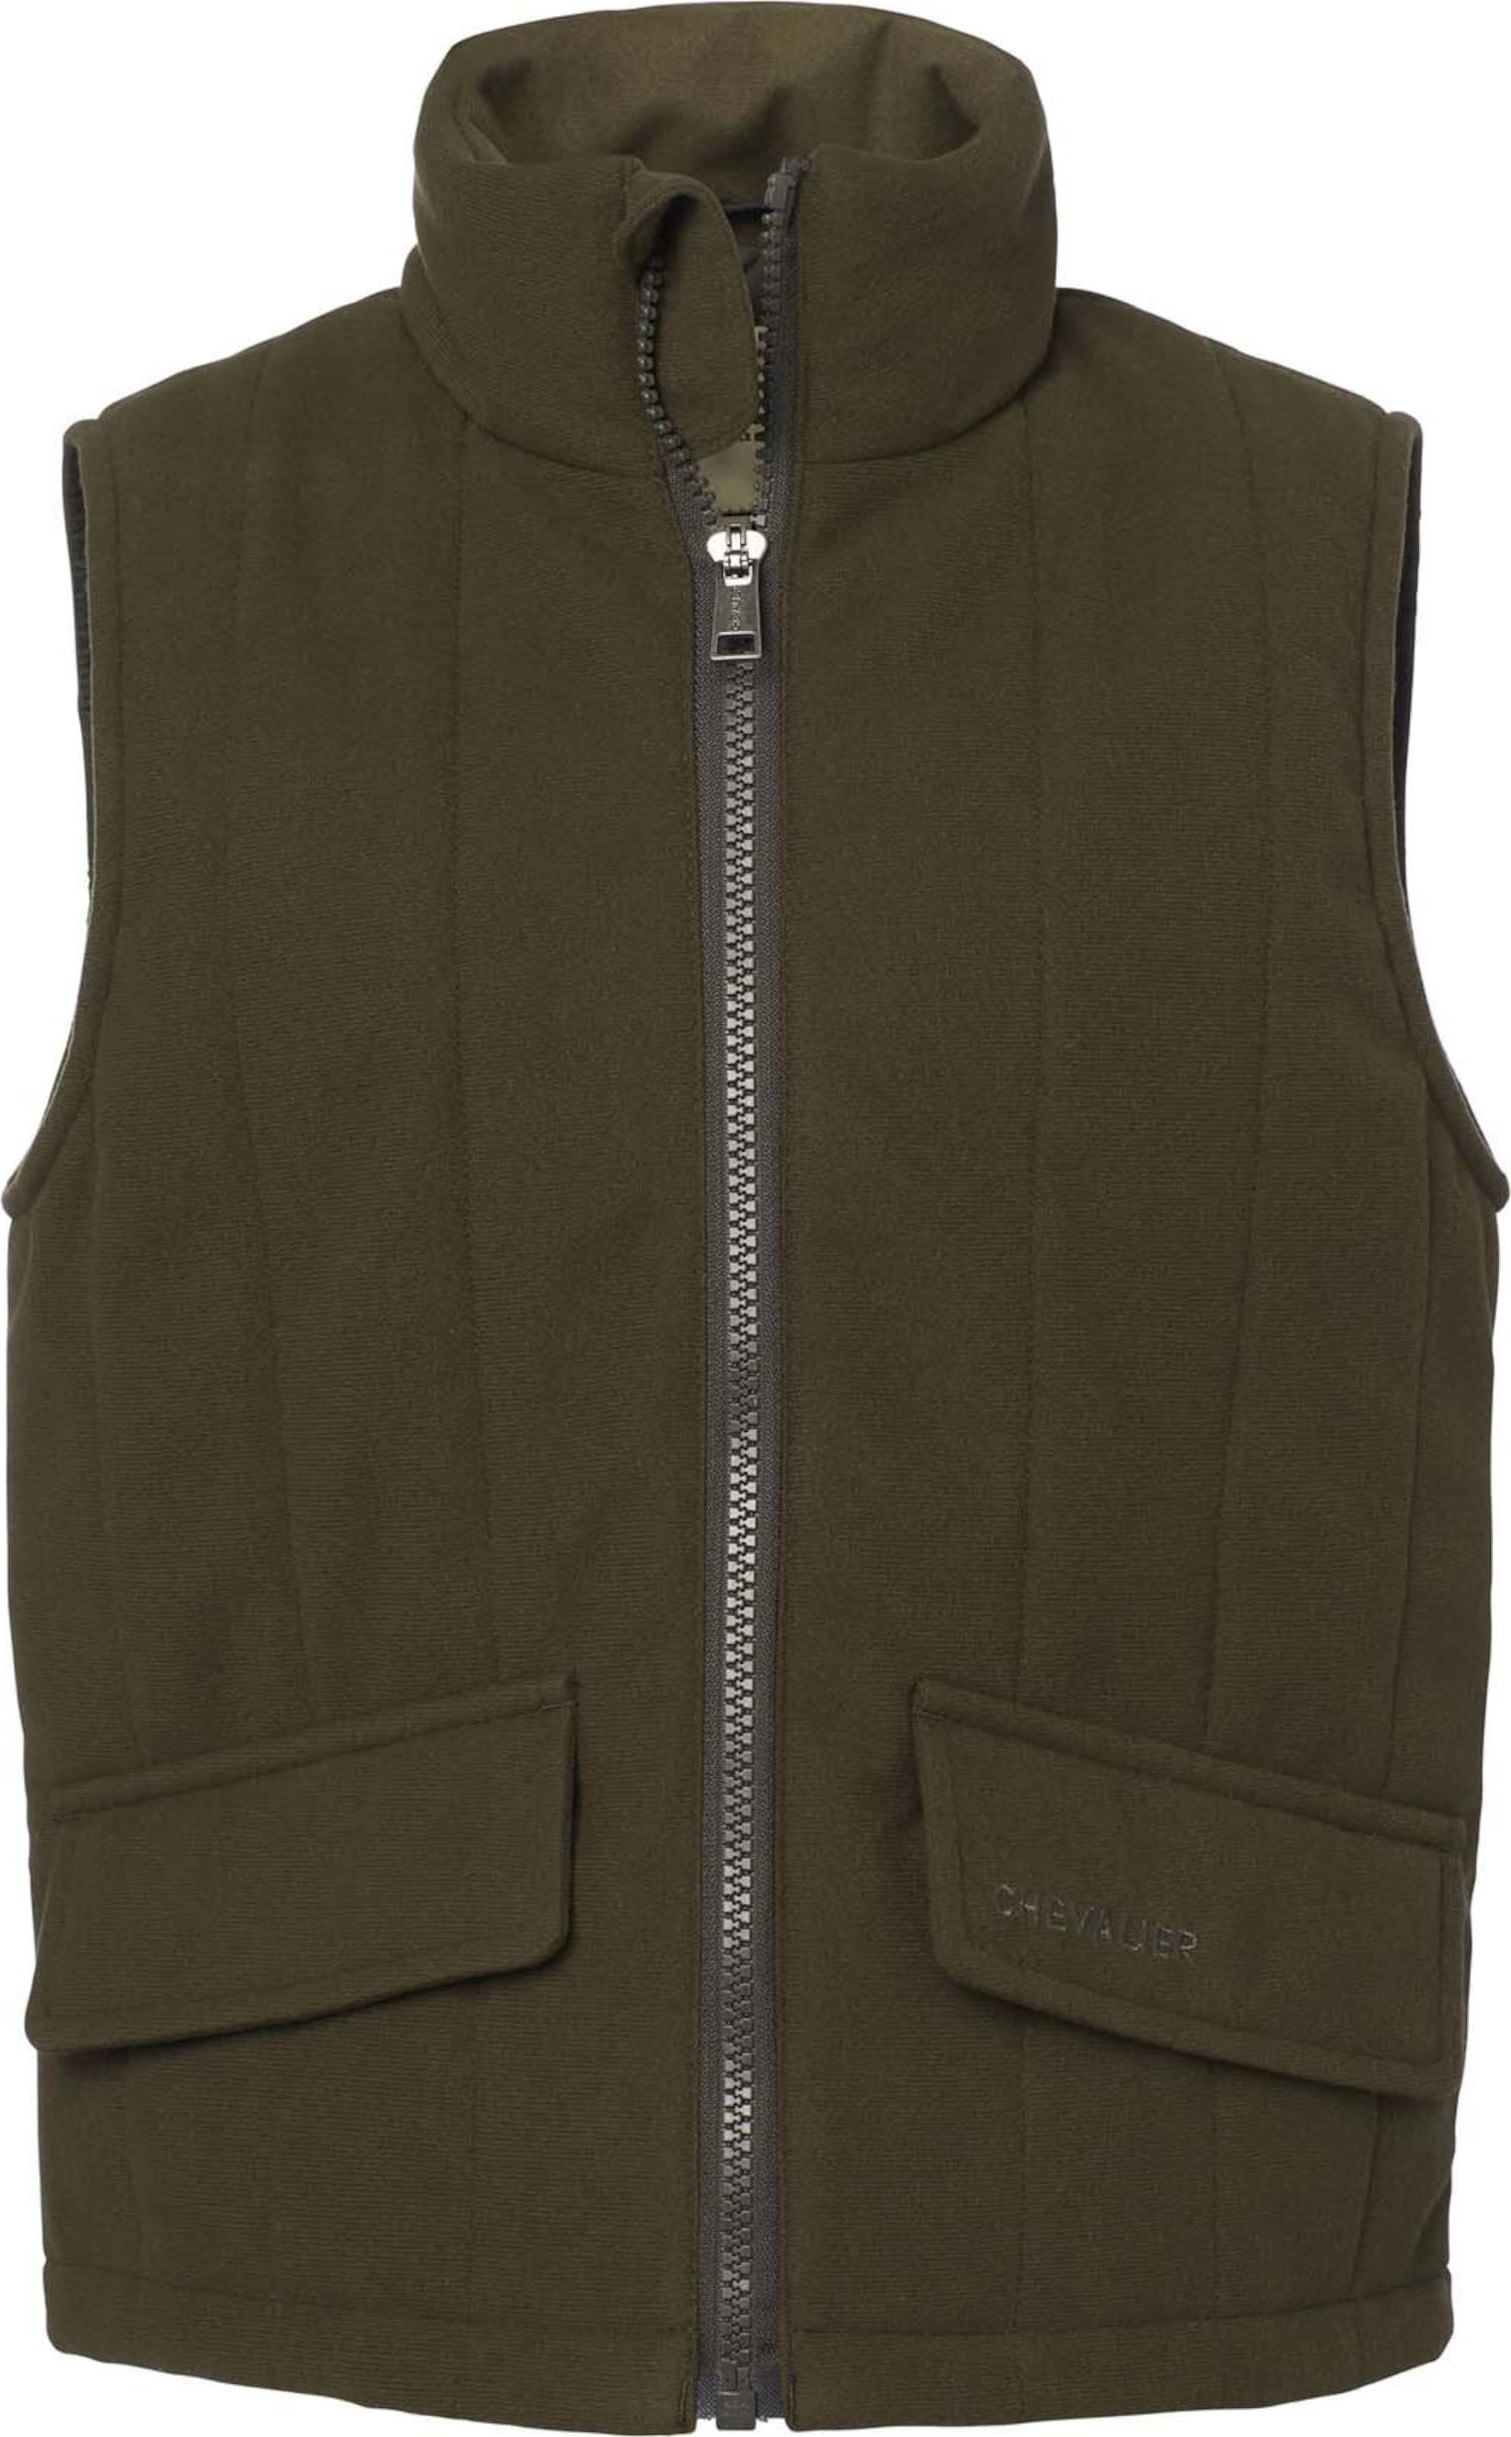 Calf Padded Vest Junior Leather Brown